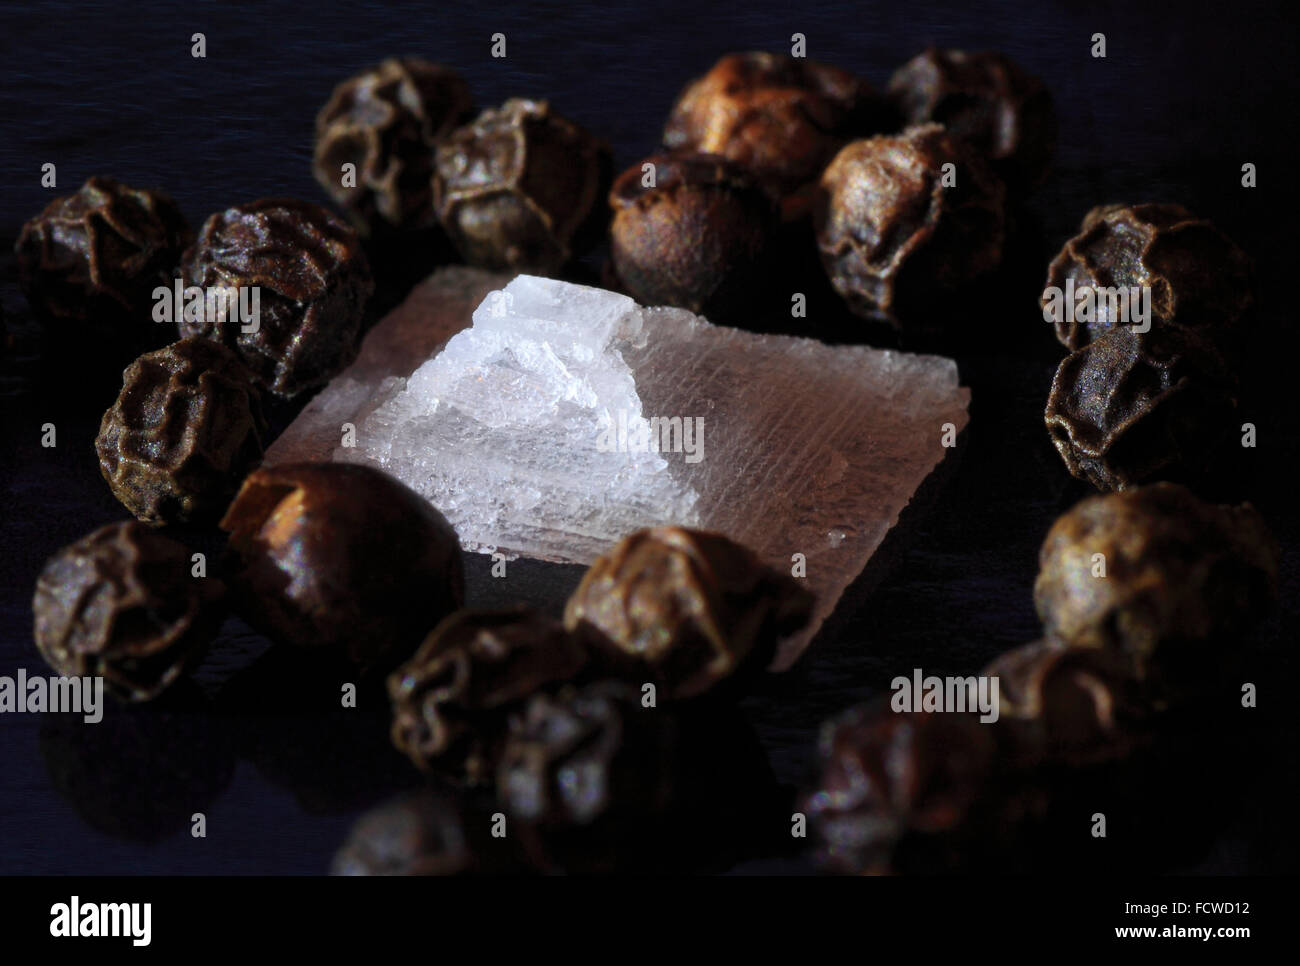 Sea salt crystal and whole black peppercorns on a black background. Stock Photo